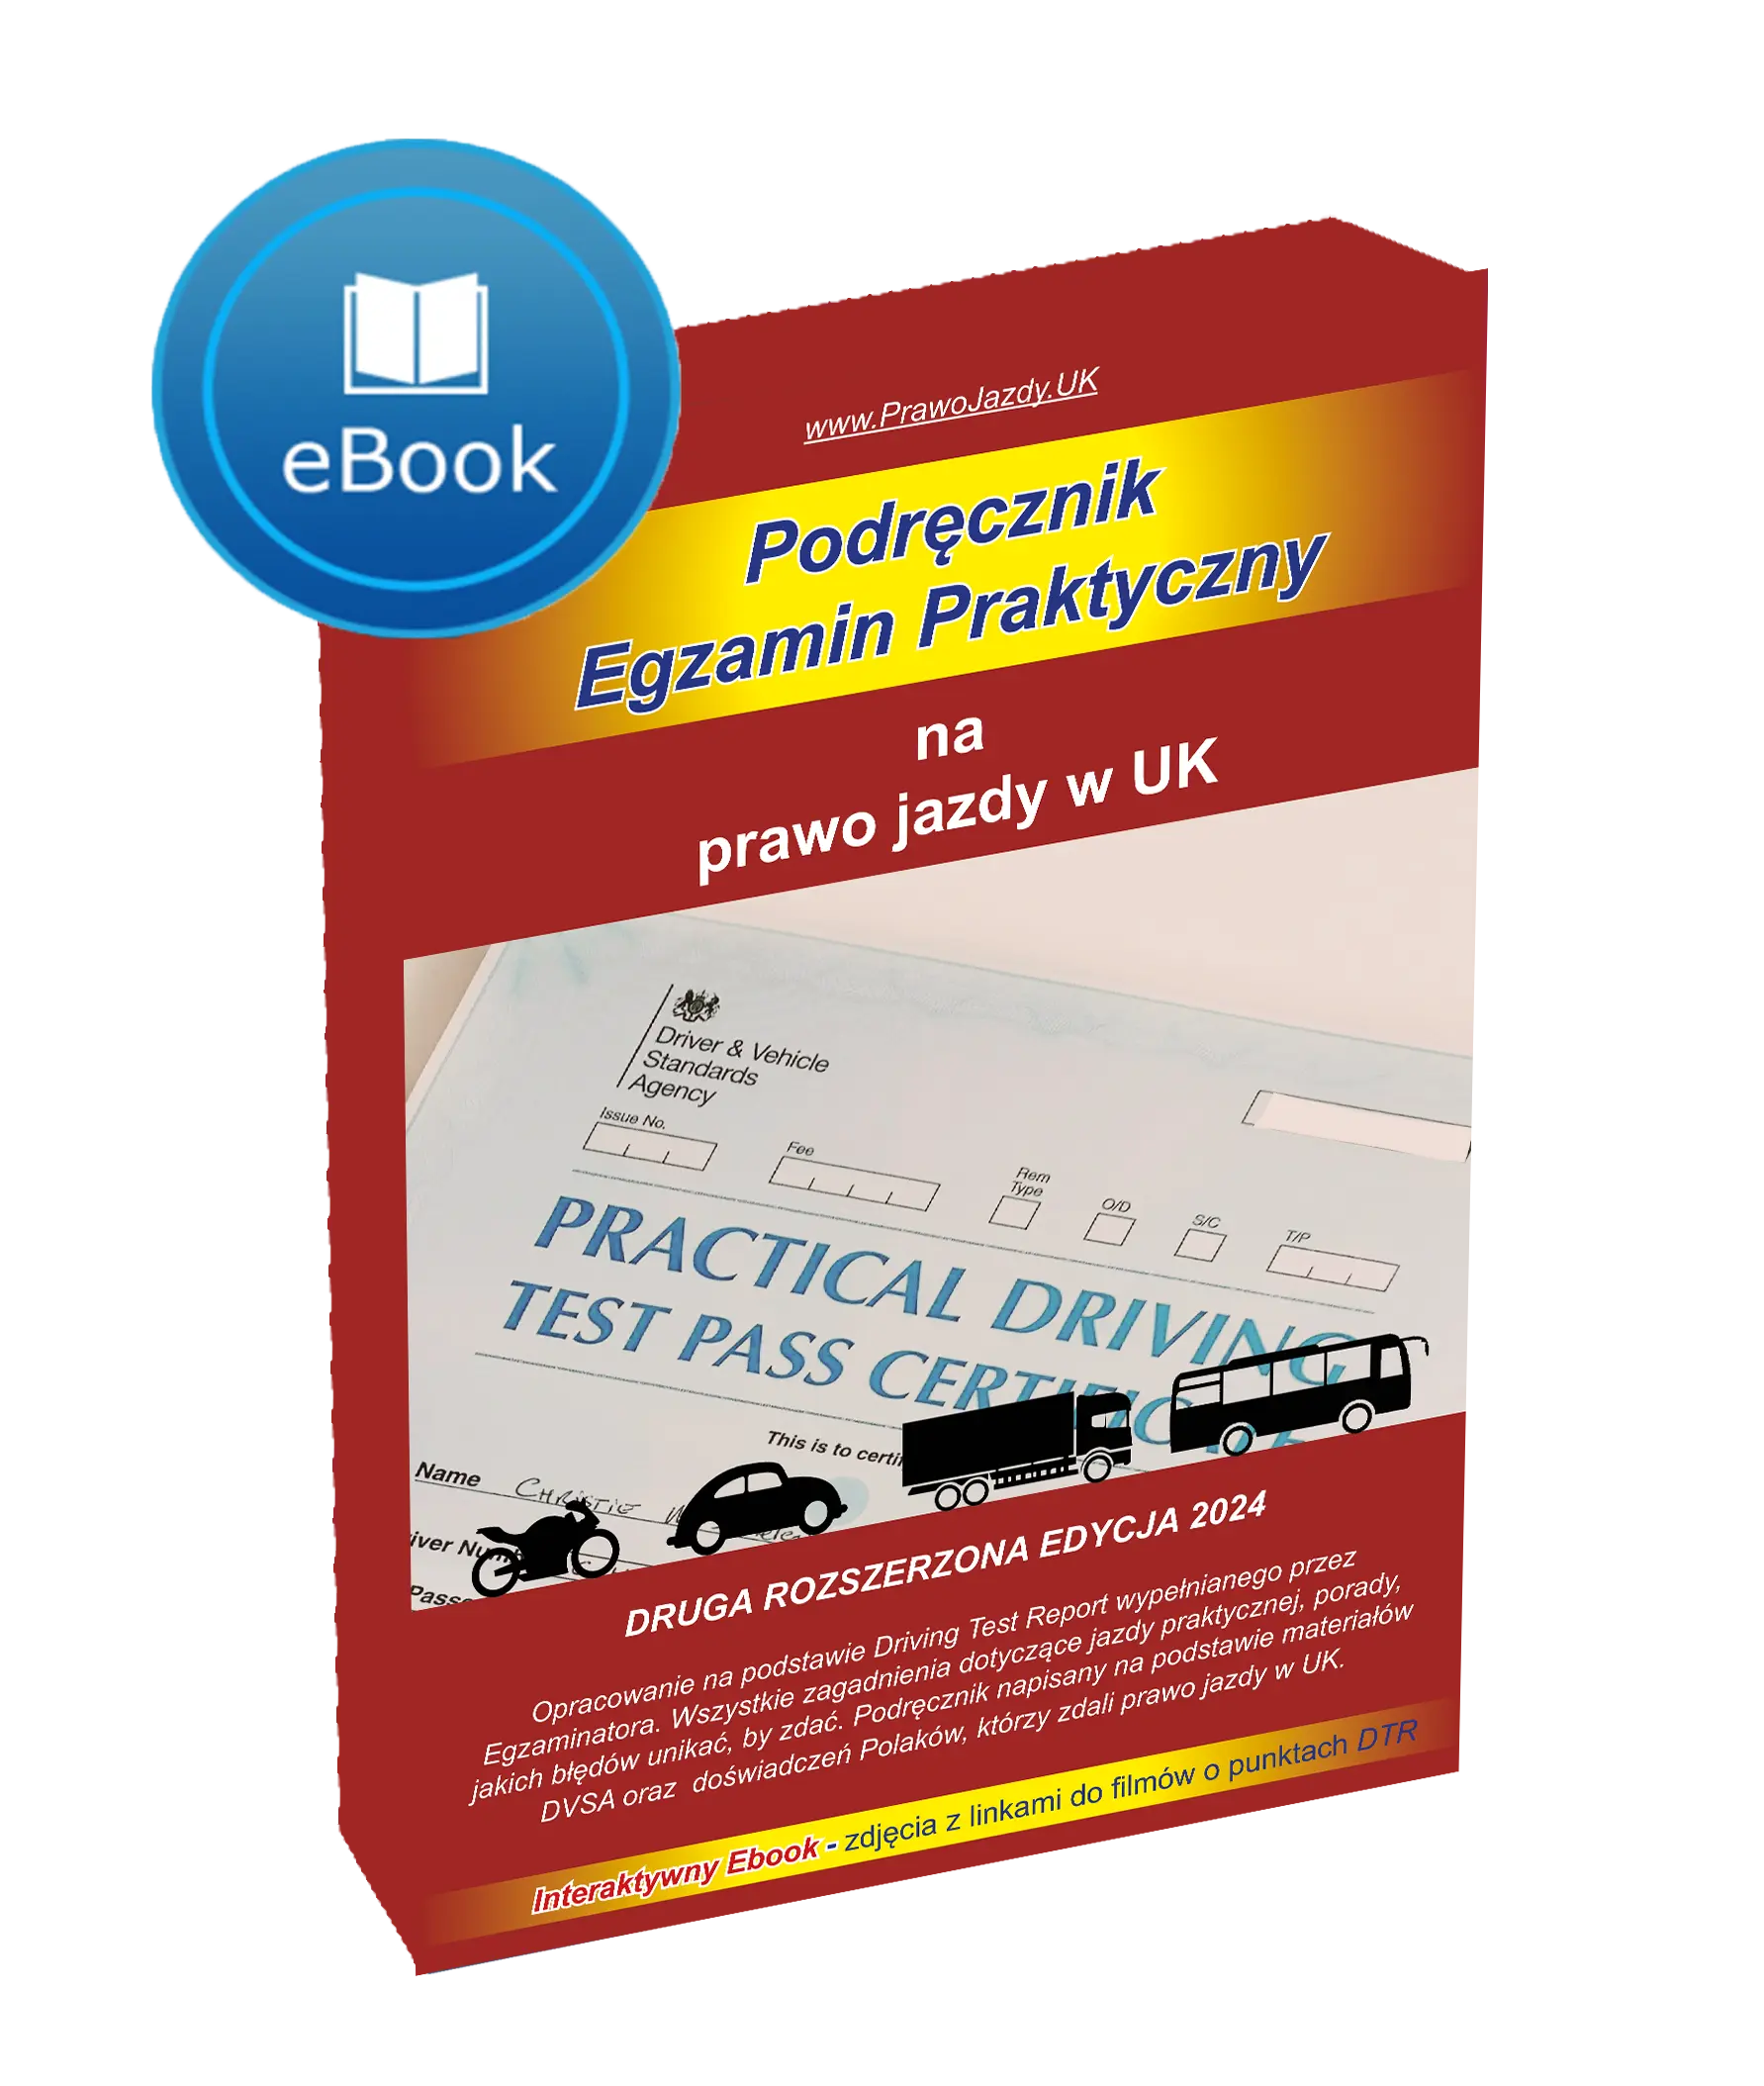 Where to pass get Practical test driving exam in UK Polish language book